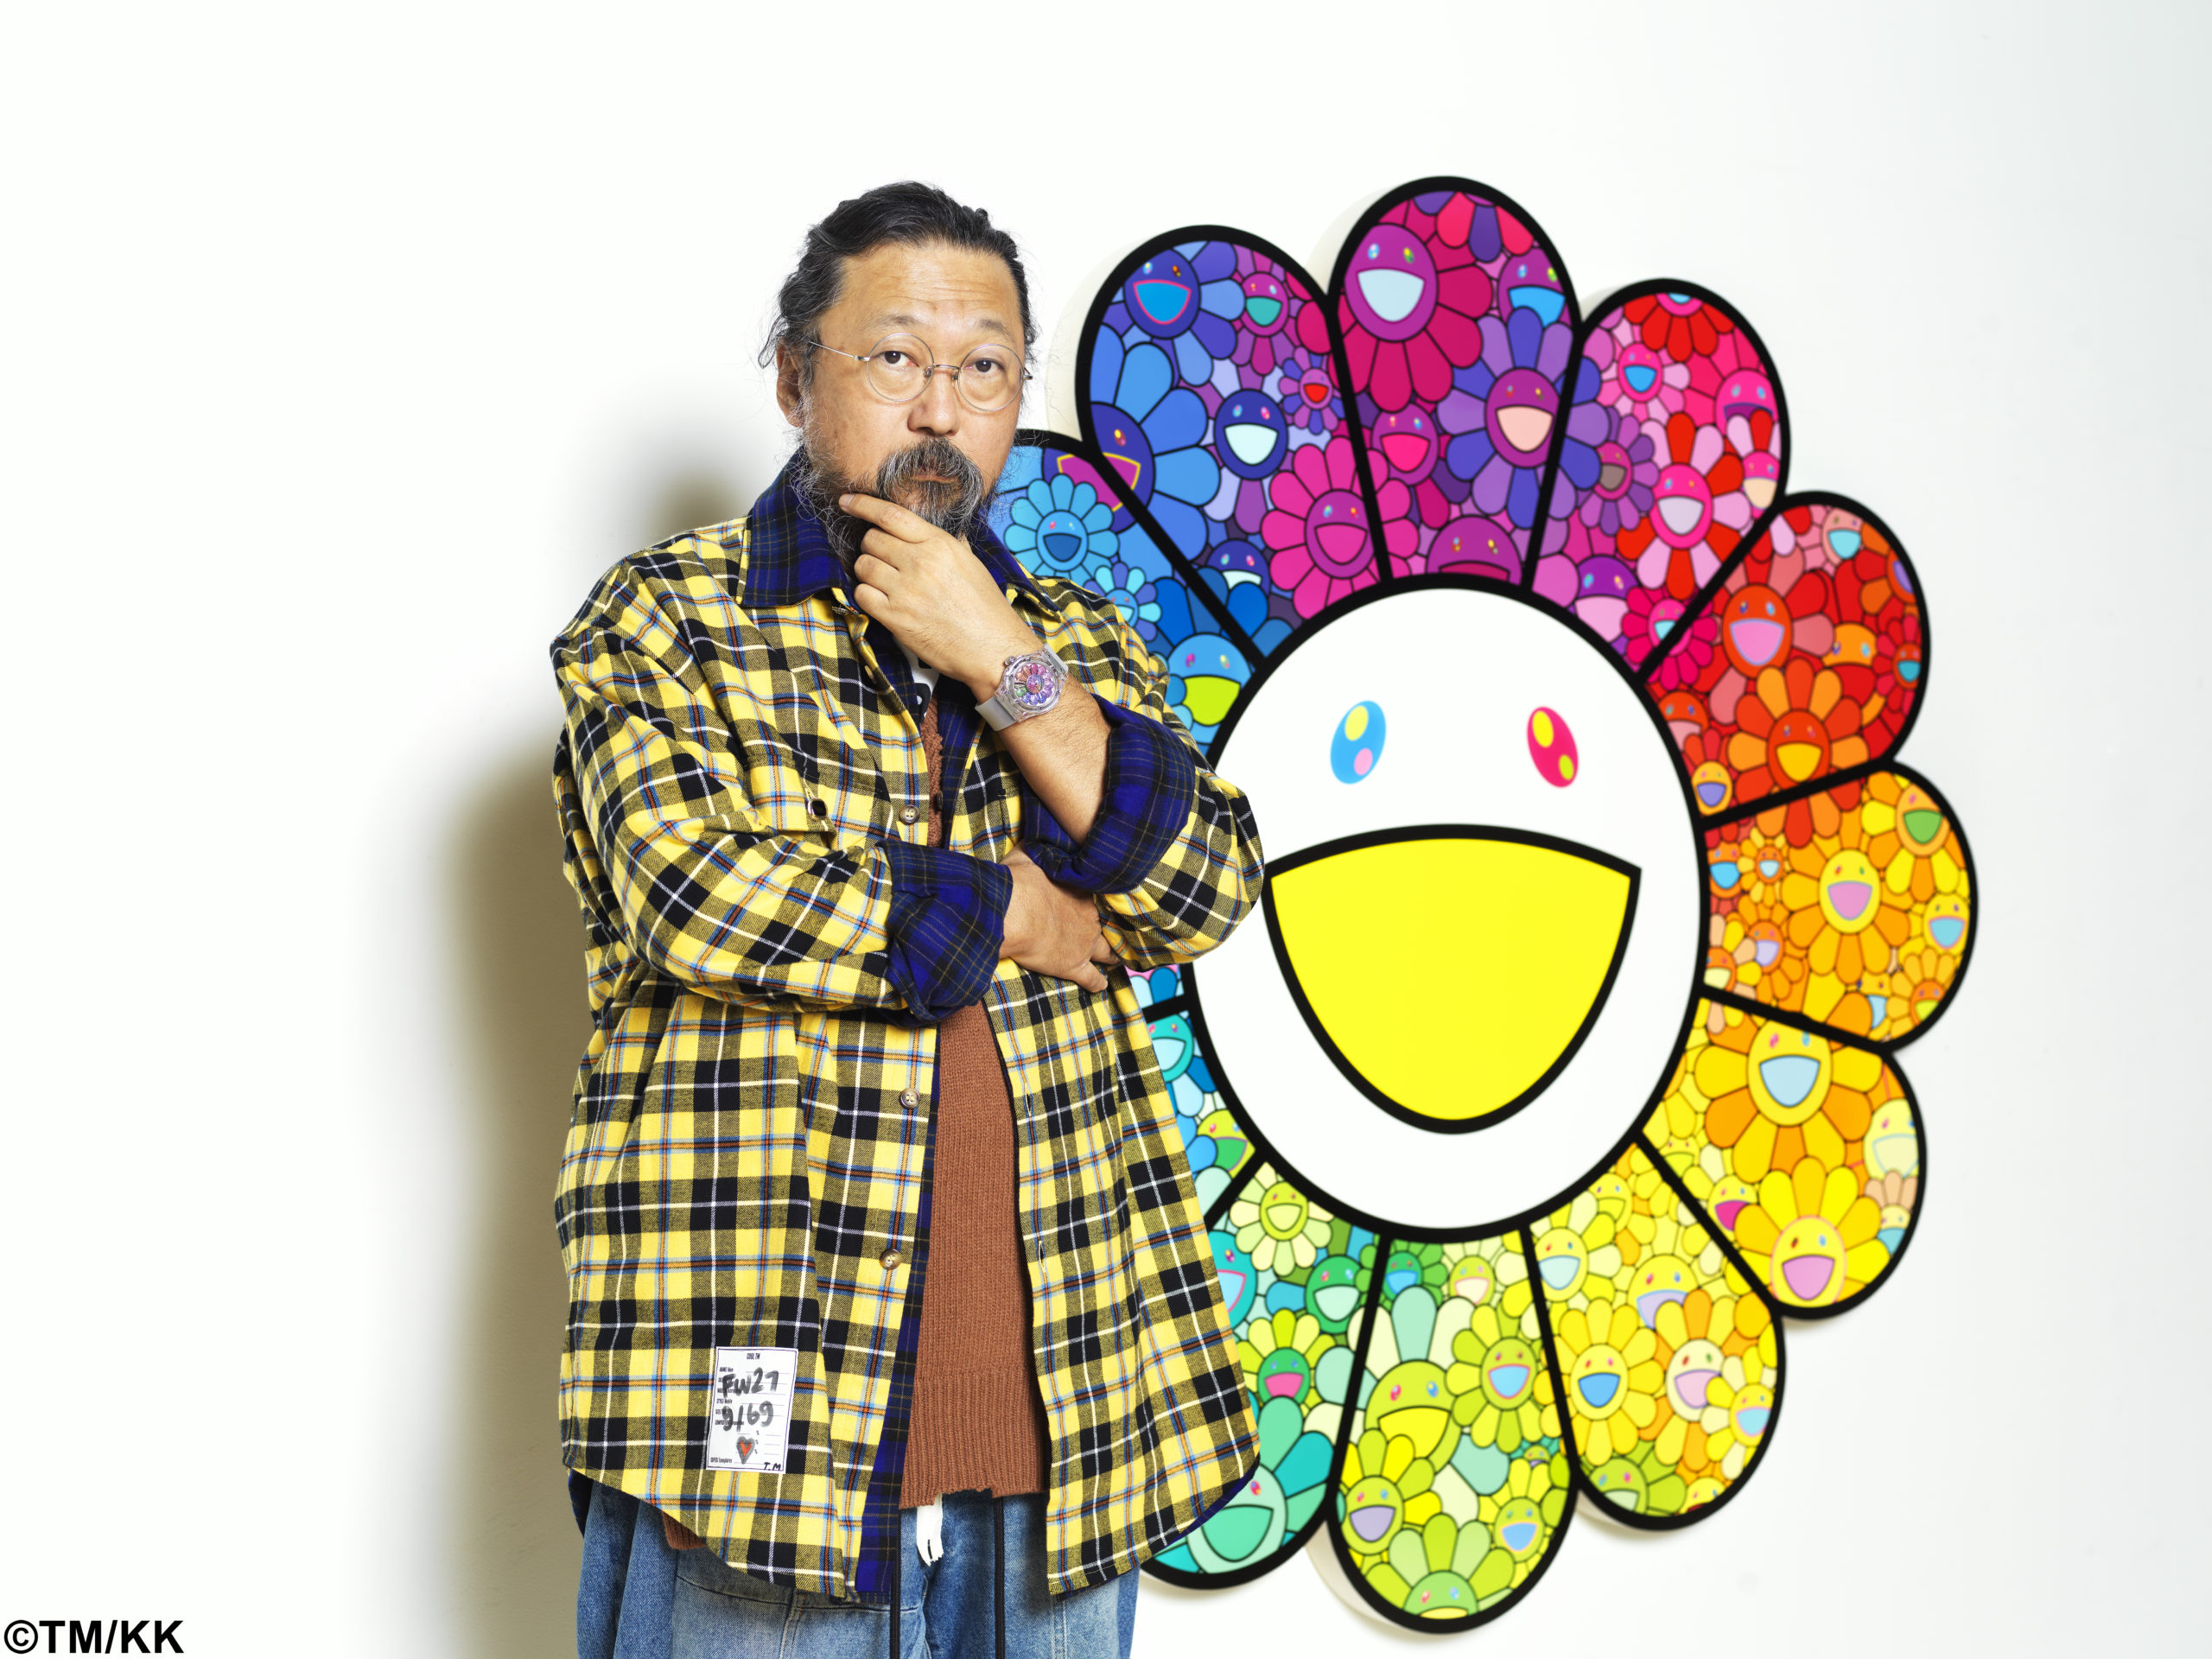 Takashi Murakami's iconic flower gets re-imagined for an all-black Hublot  watch